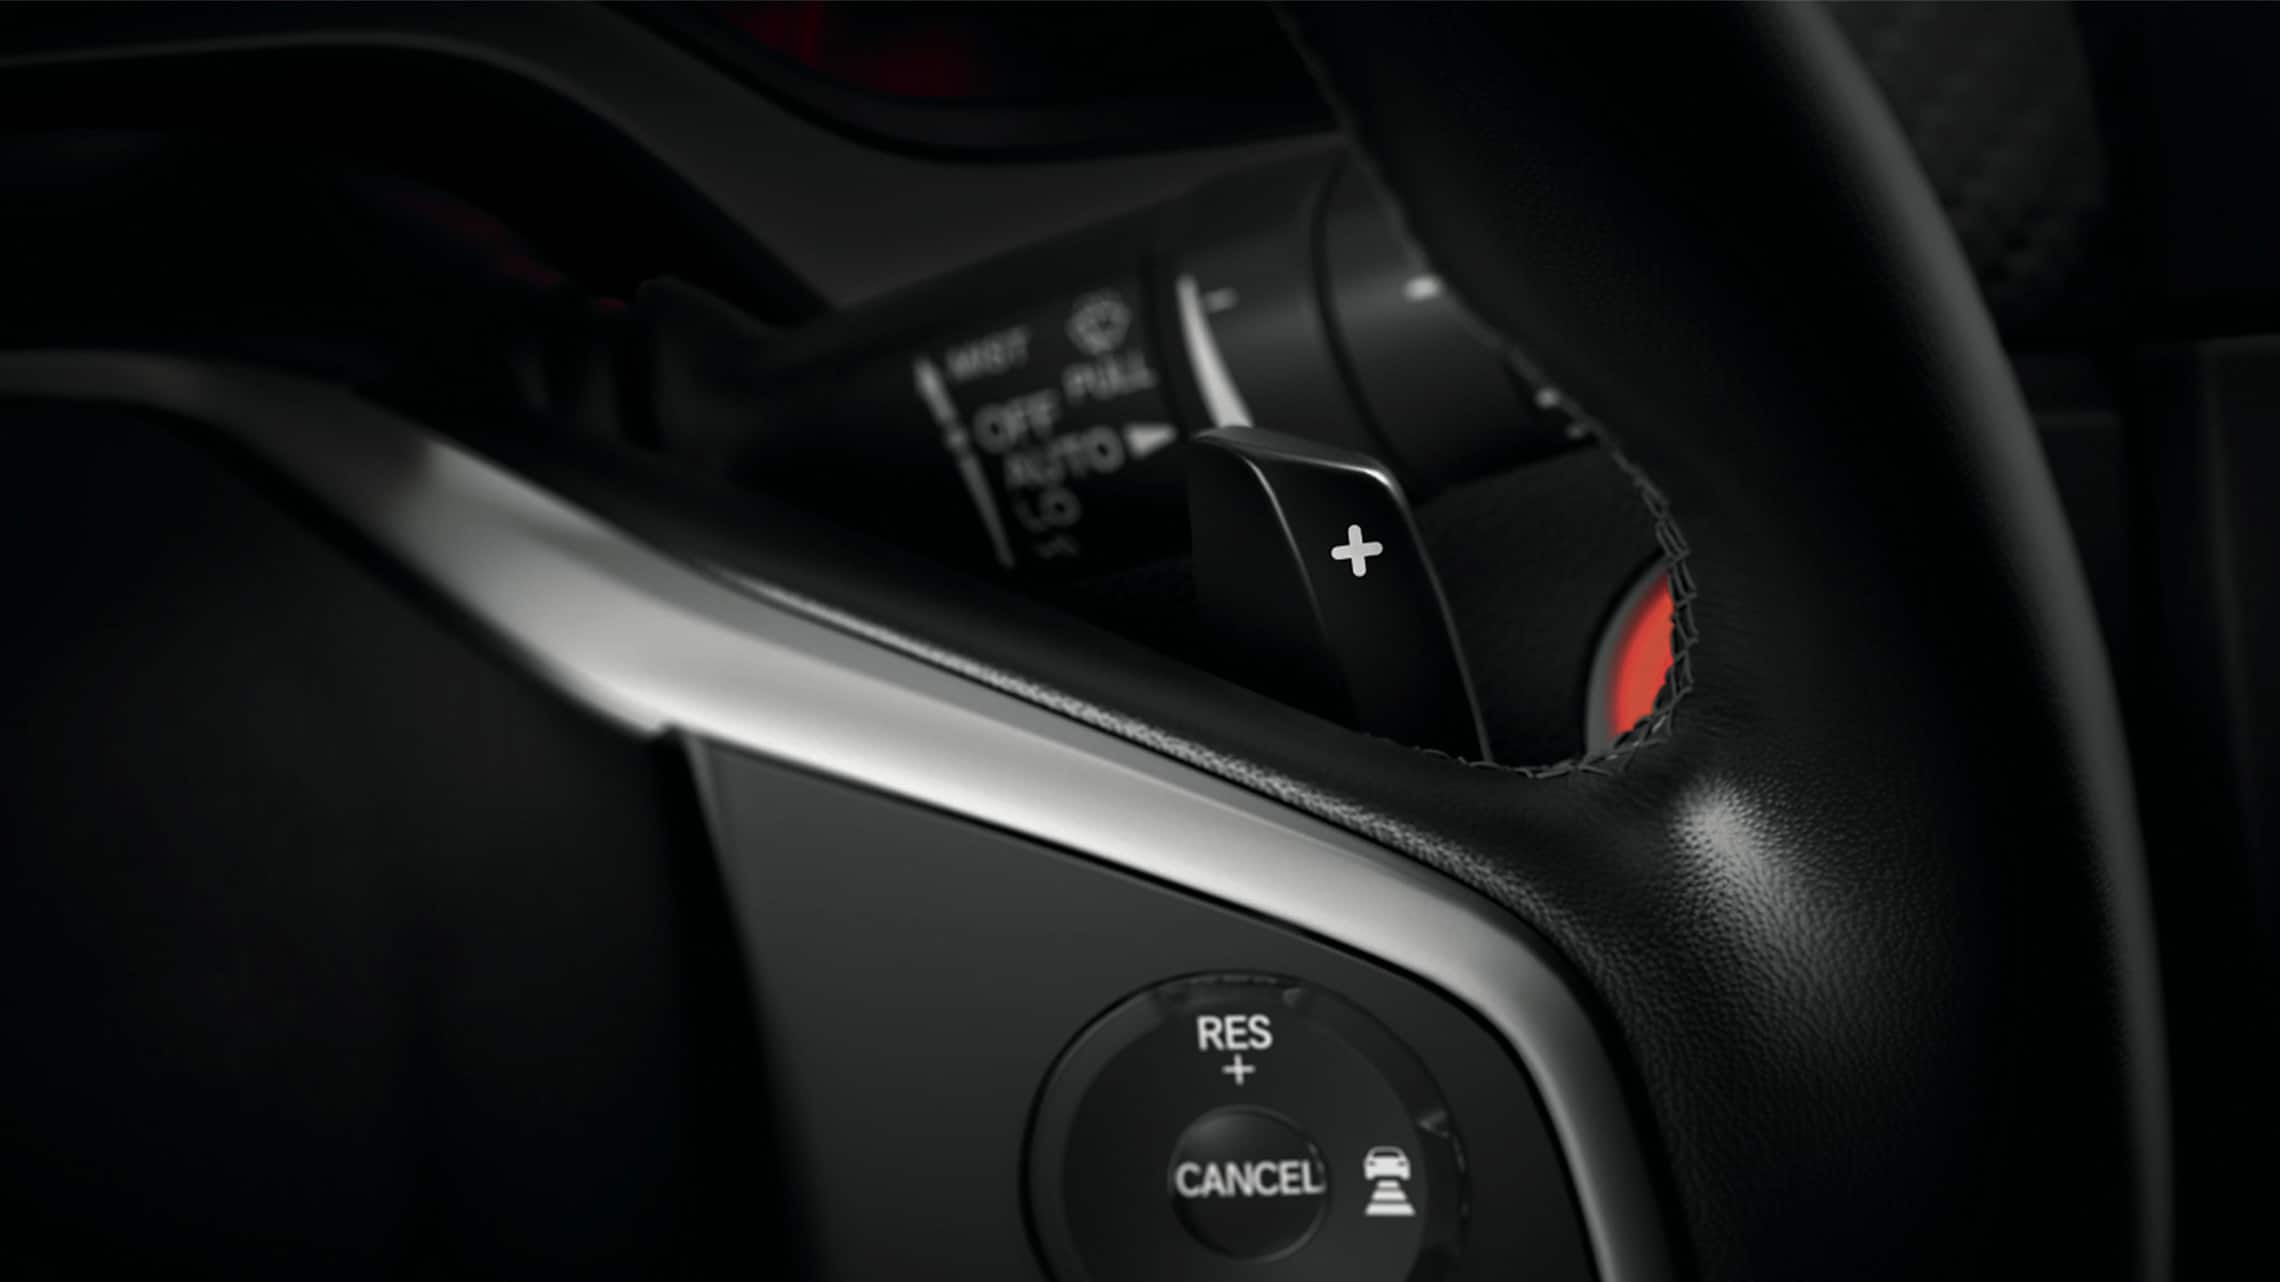 Steering wheel-mounted paddle shifter detail on the 2021 Honda Civic Sport Touring Hatchback.